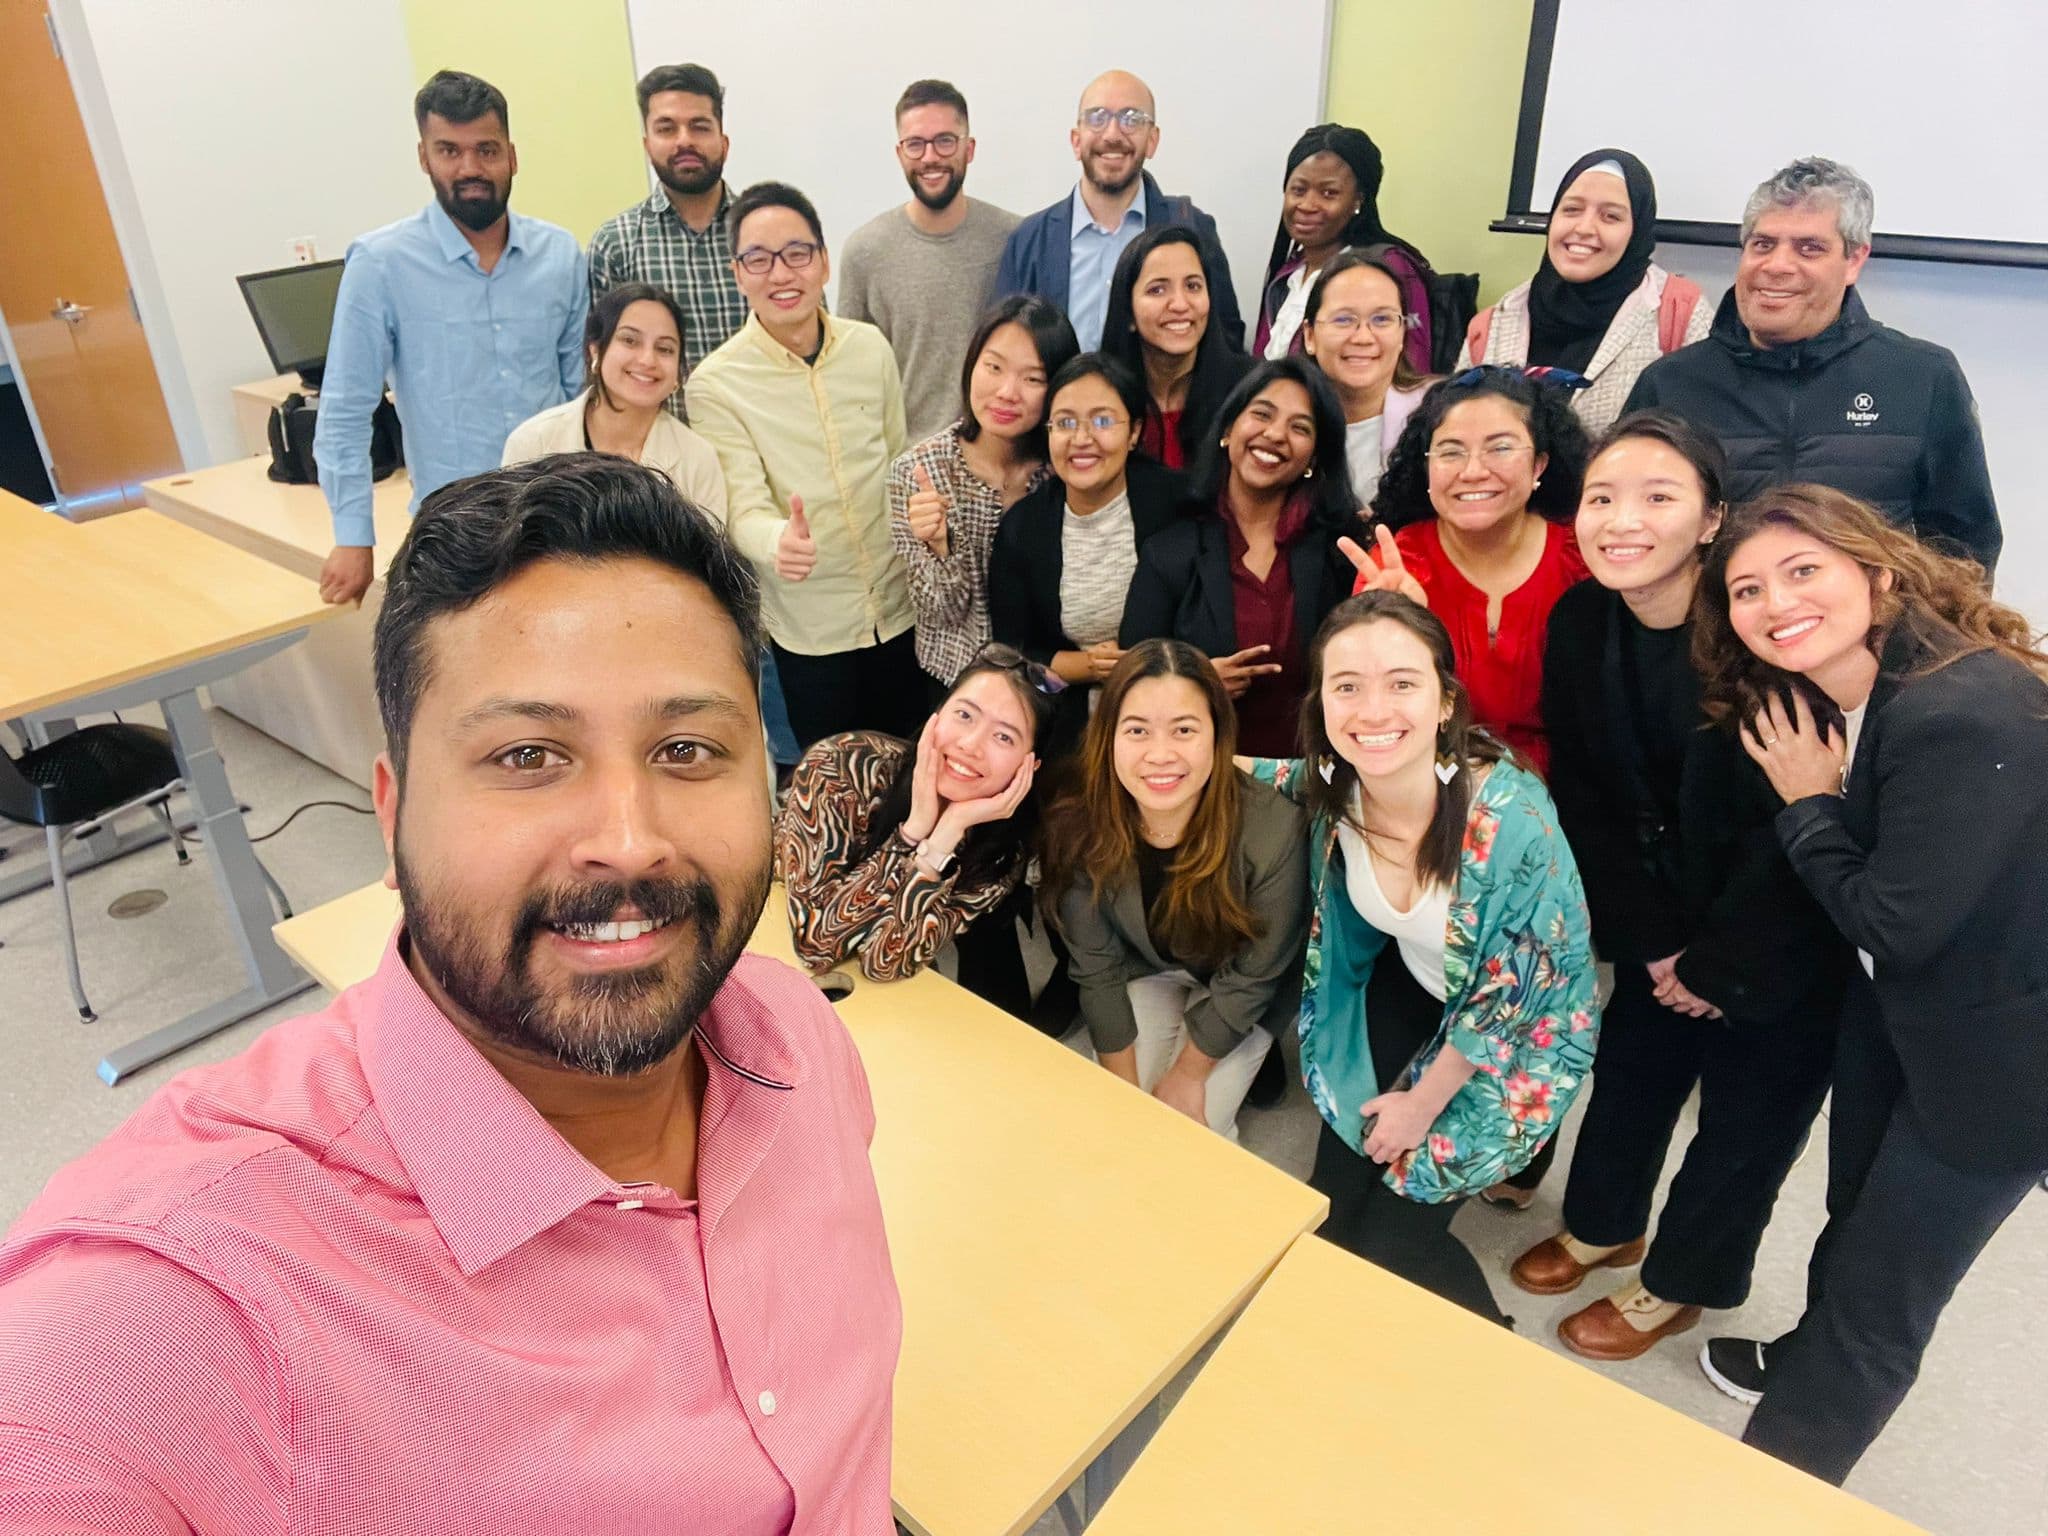 Rosin Sara Roy enjoys brand campaigns, social media strategy and brand measurement courses. Here she is with her classmates - center, in the second row from the back - at the end of a class at Ottawa campus.